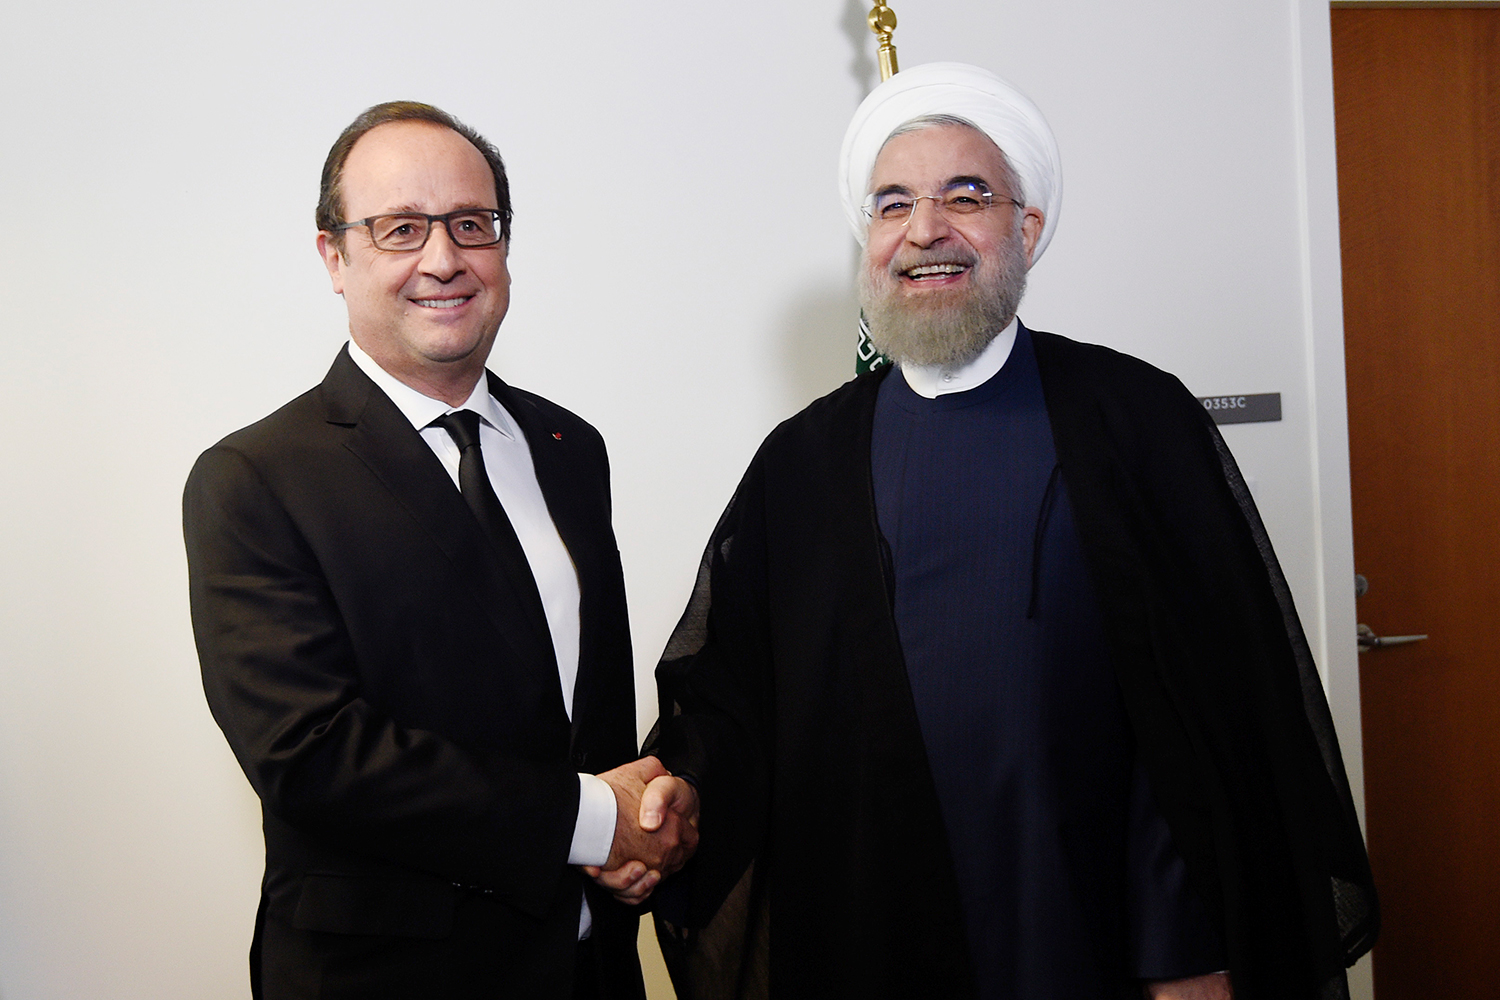 Meeting between Hollande and Rouhani suspended because France refuses to serve halal meat